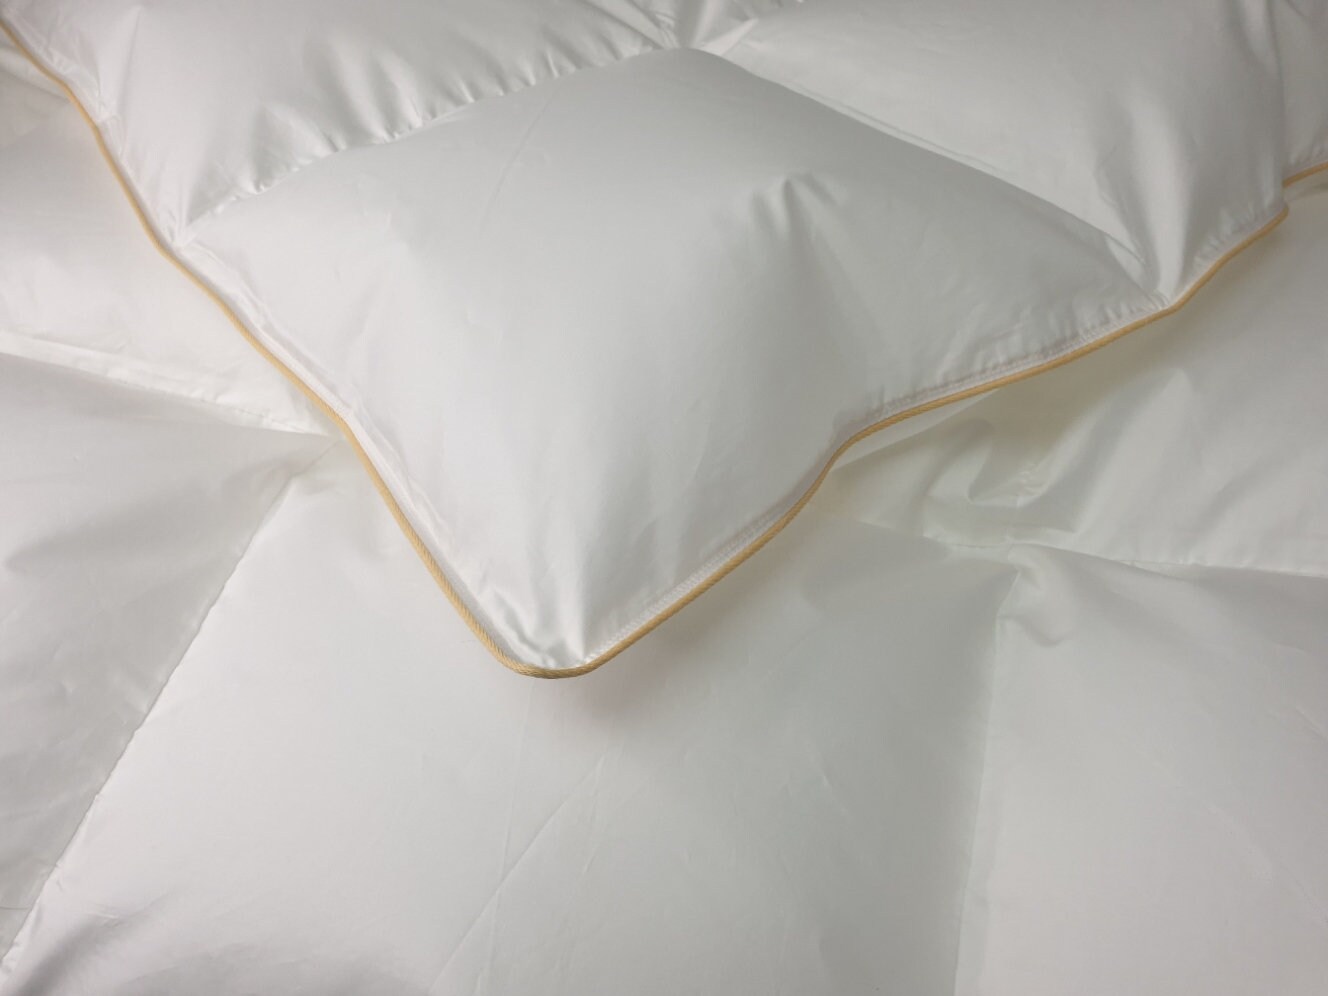 Pillow Inserts W/ Bulk Goose Down Feather Filling Fill for Stuffing Pillows,  Comforters, Jackets, and More Made in USA 